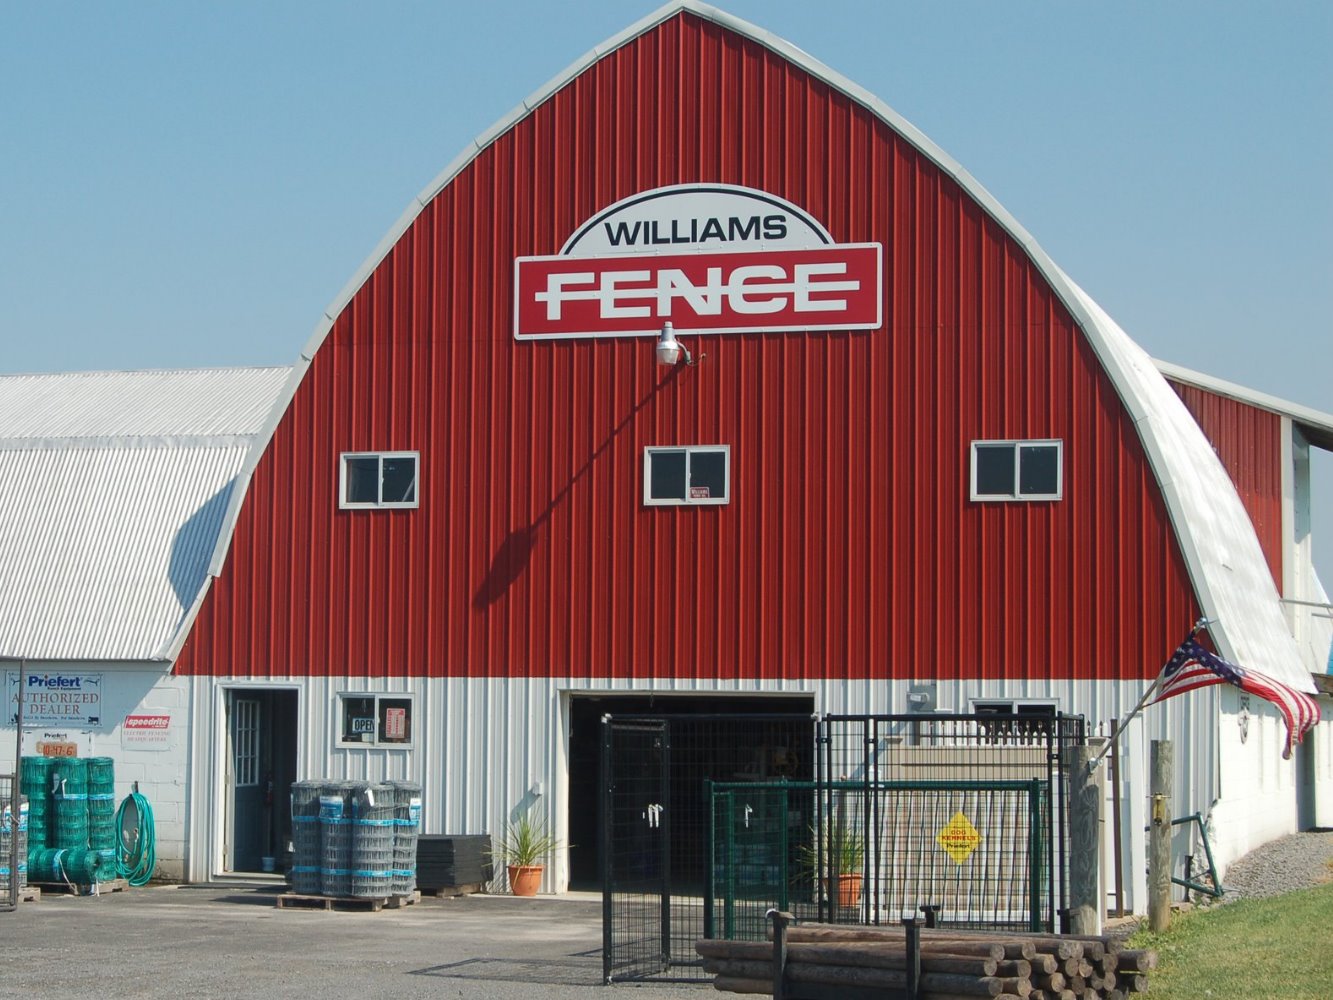 The Williams Fence Difference in Woods Corners New York Fence Installations